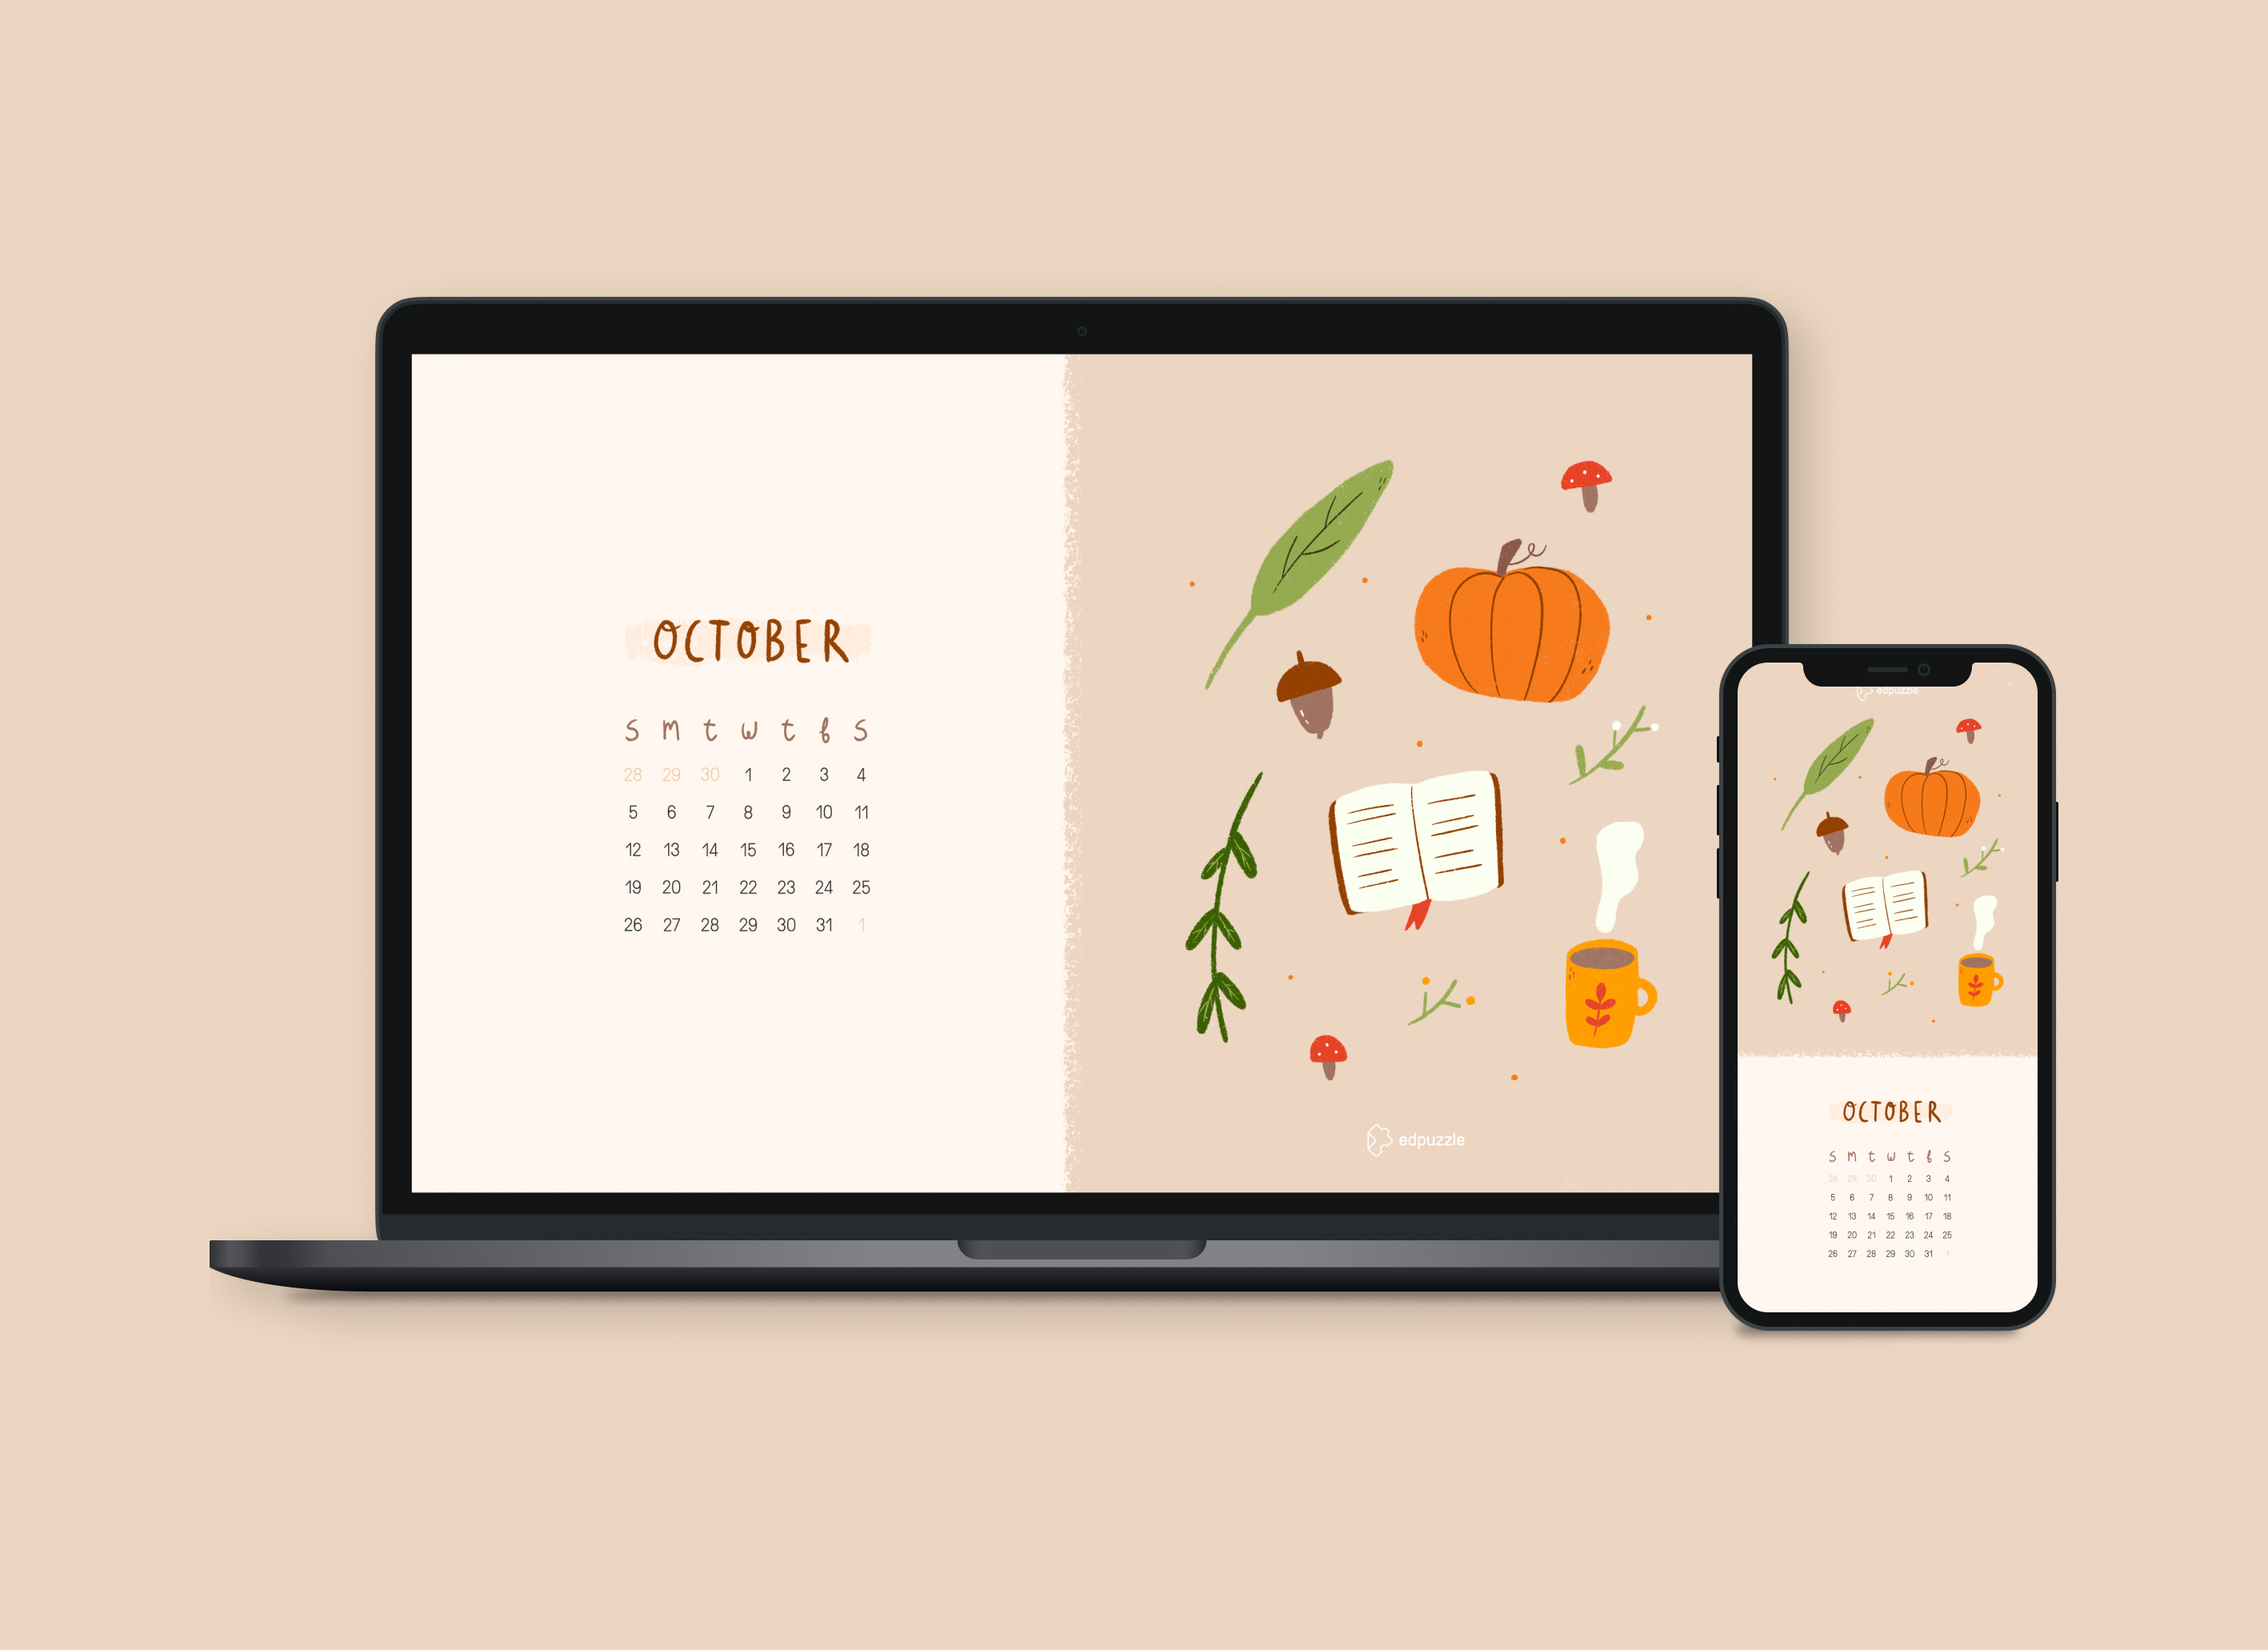 October Calendar Mobile Wallpaper Abstract Plant Bouquet Background  Wallpaper Image For Free Download  Pngtree